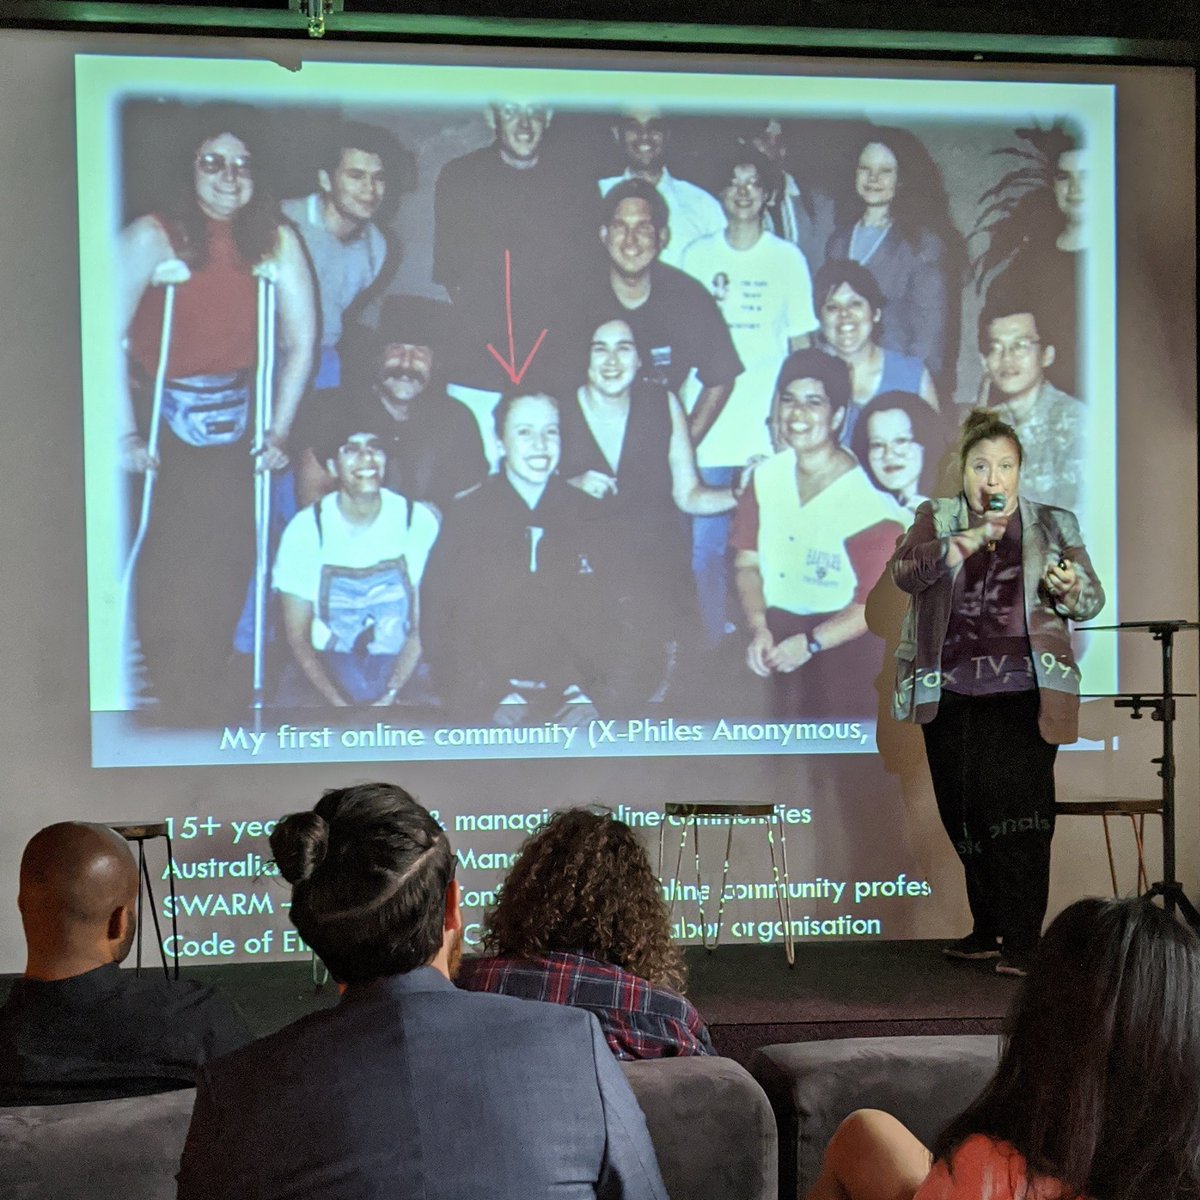 Here's  @venessapaech with an extremely good photo of her in her first online community: X-Philes Anonymous (where she met her husband!) Venessa is now a community management expert, and has seen the conversation change to being dominated by algorithms  #autocult